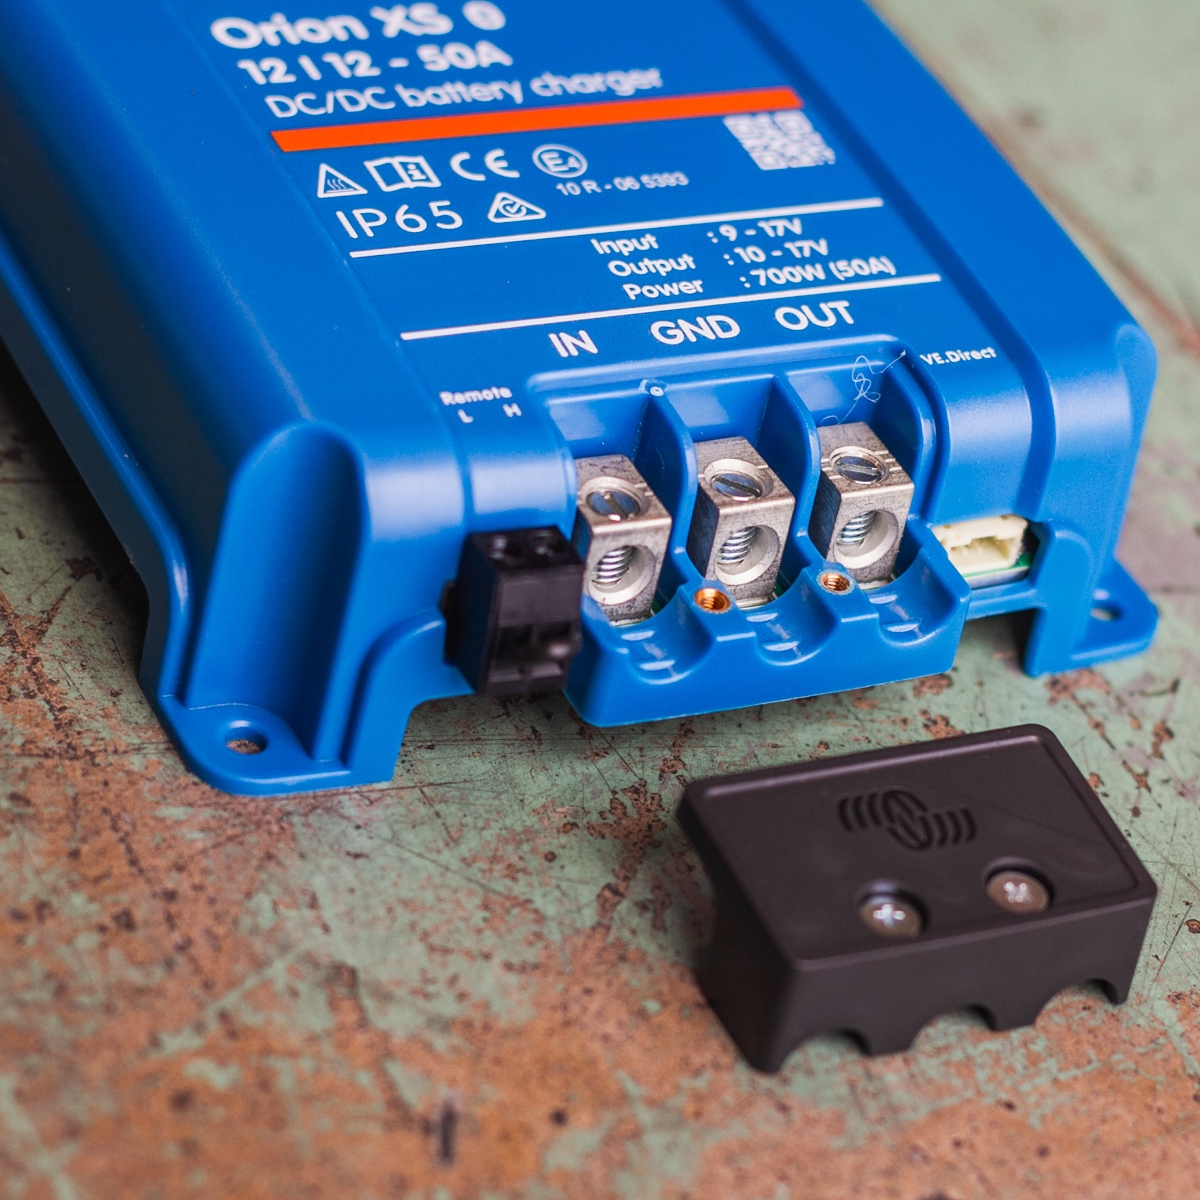 Close-up of a blue Orion-Tr Smart DC/DC battery charger on a workbench, featuring connectors and terminals, showcasing the reliable performance of the Orion XS 12/12-50A Victron Non-Isolated Smart BuckBoost.